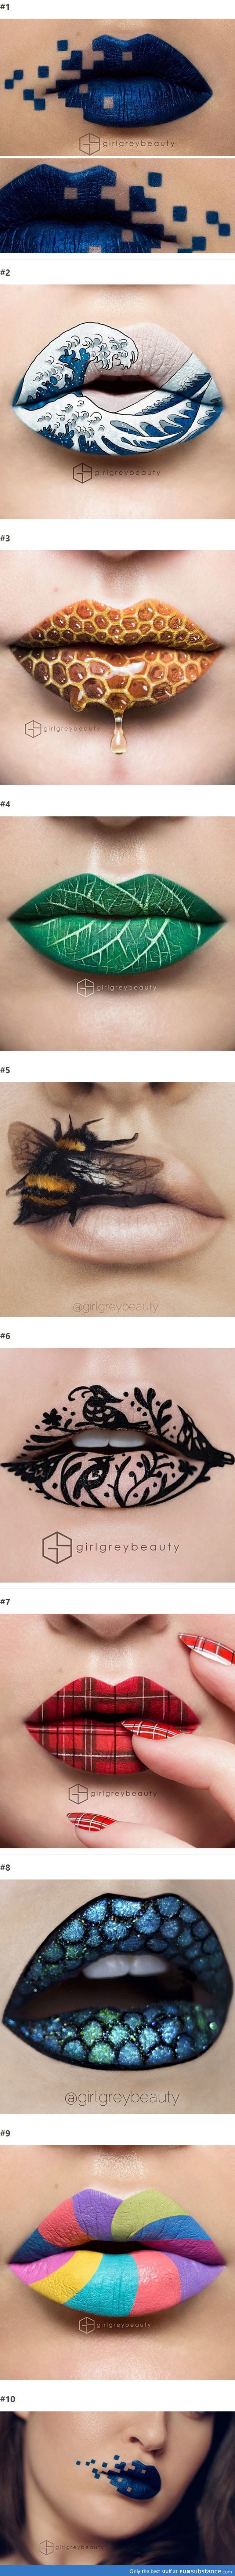 Makeup Artist Uses Her Lips To Create Stunning Art Pieces